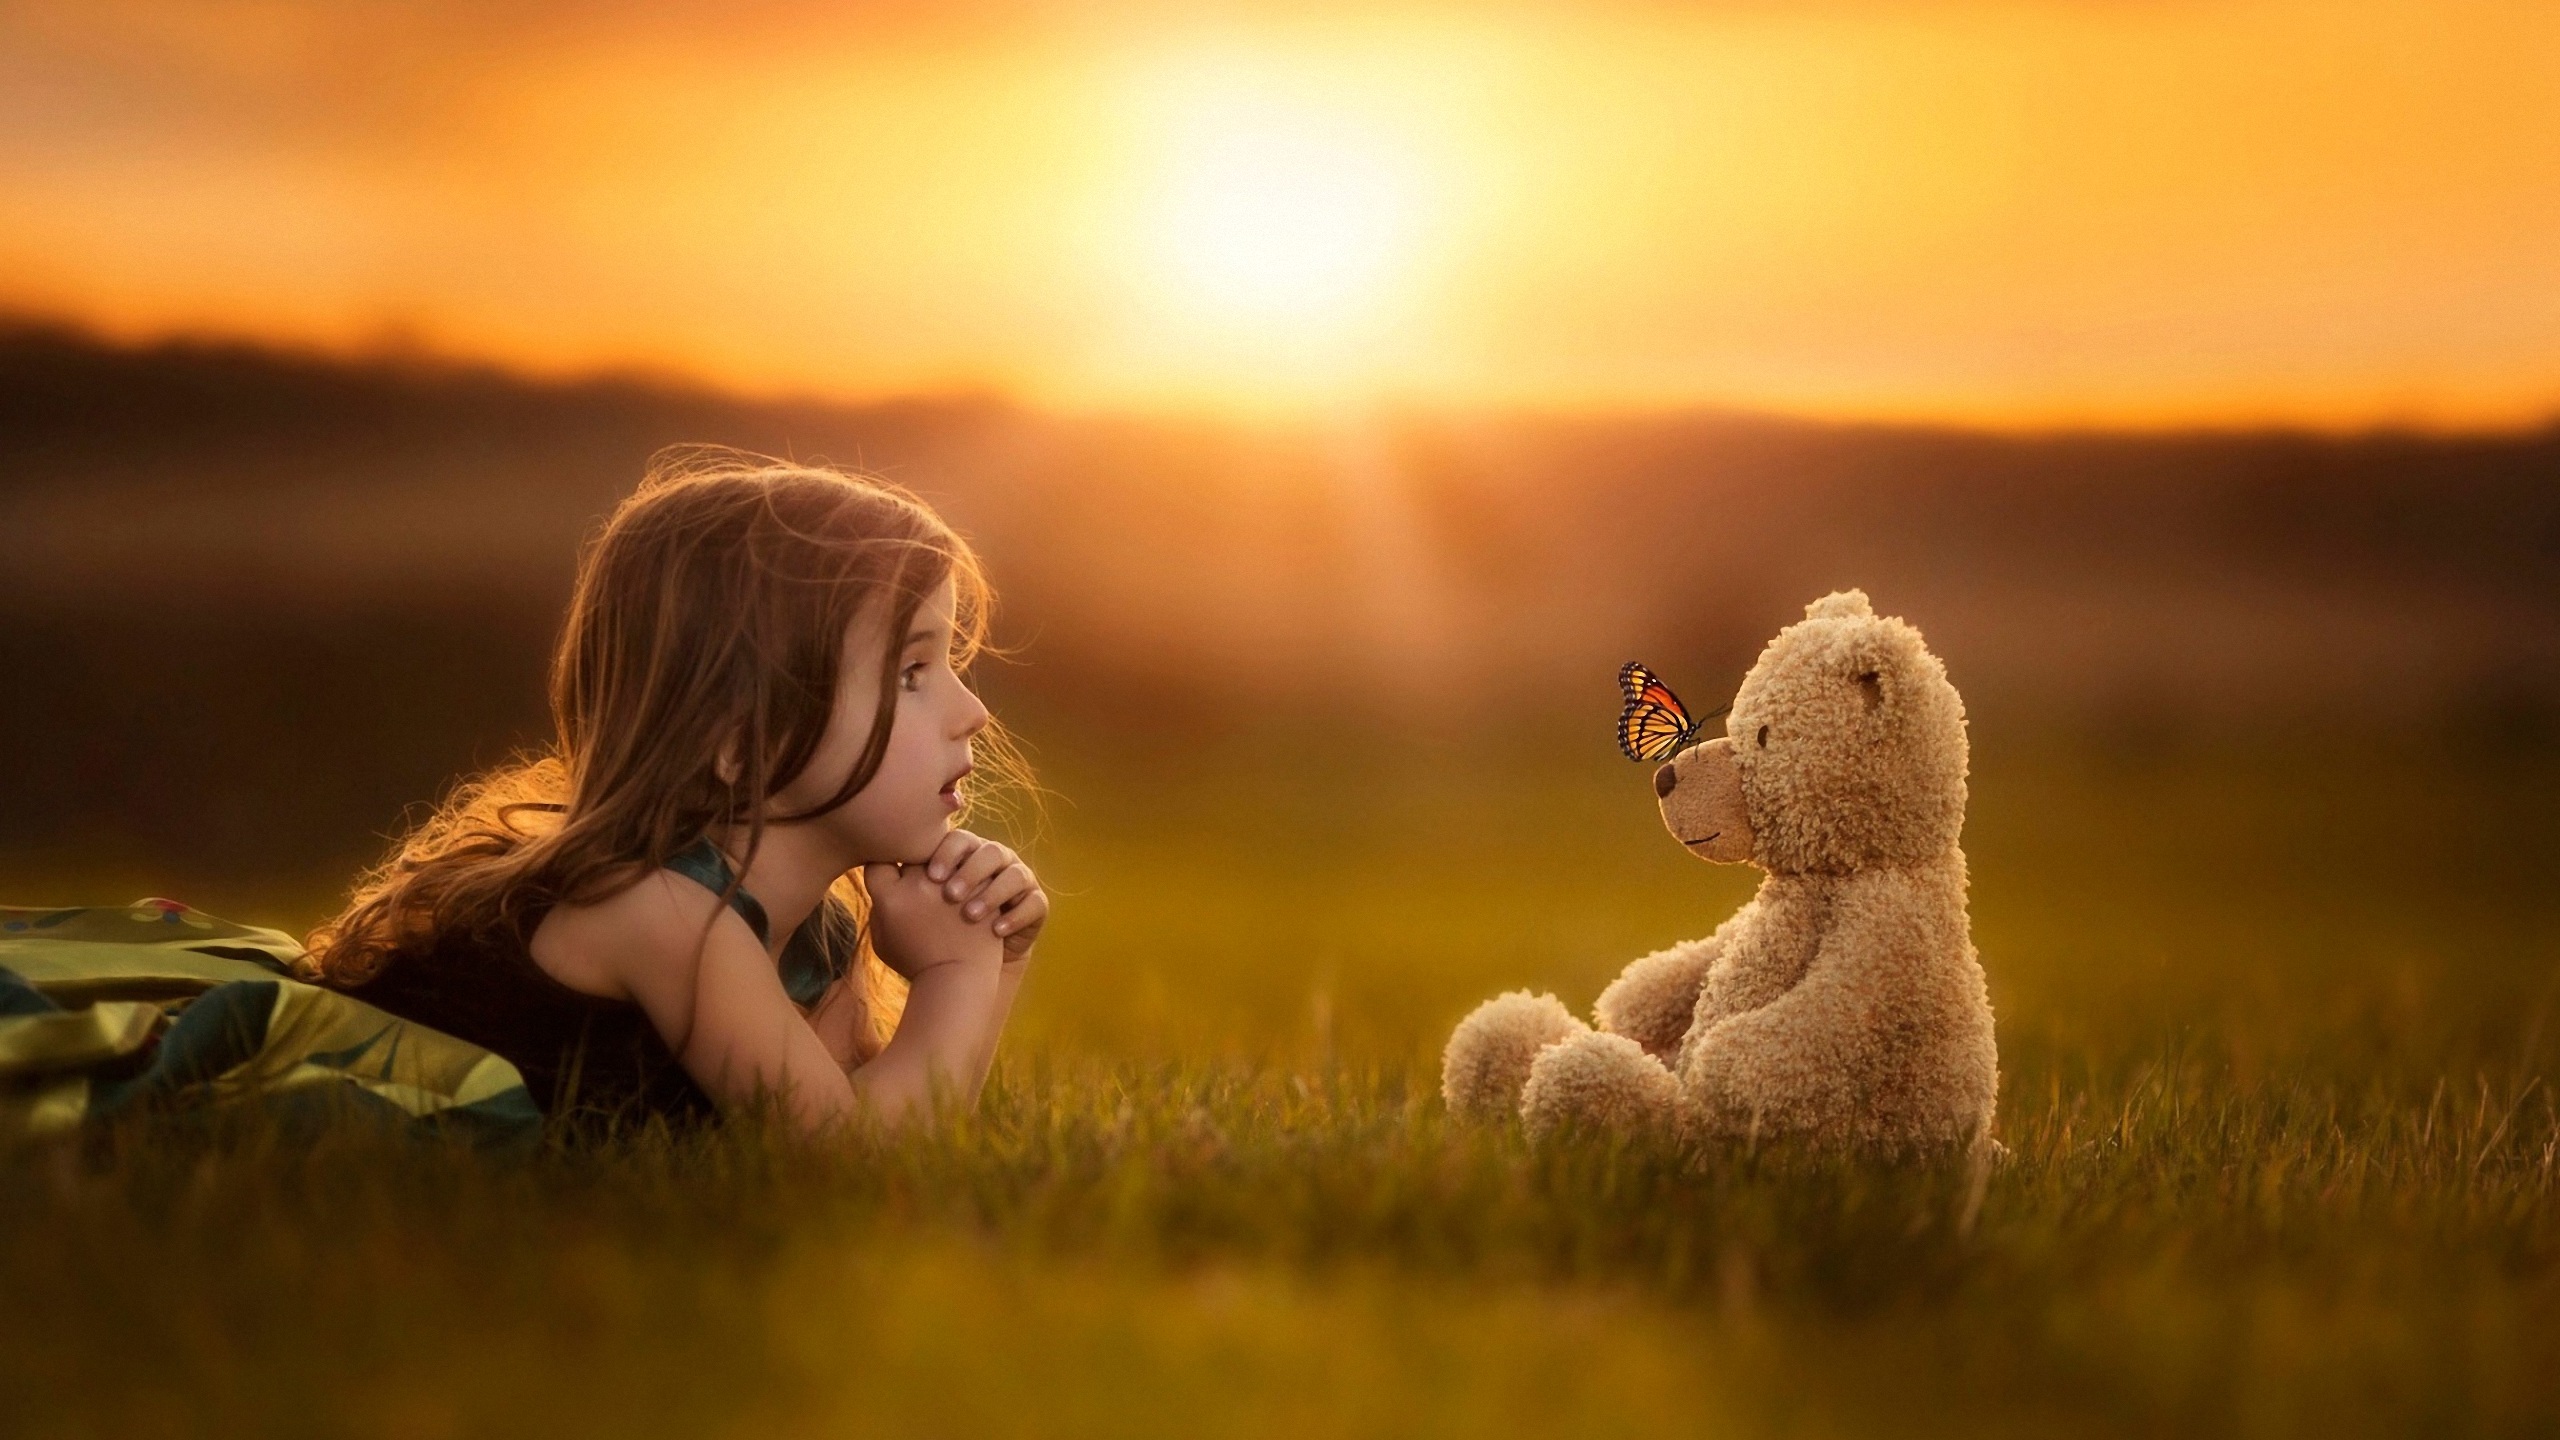 Child HD Wallpaper by Rob Buttle